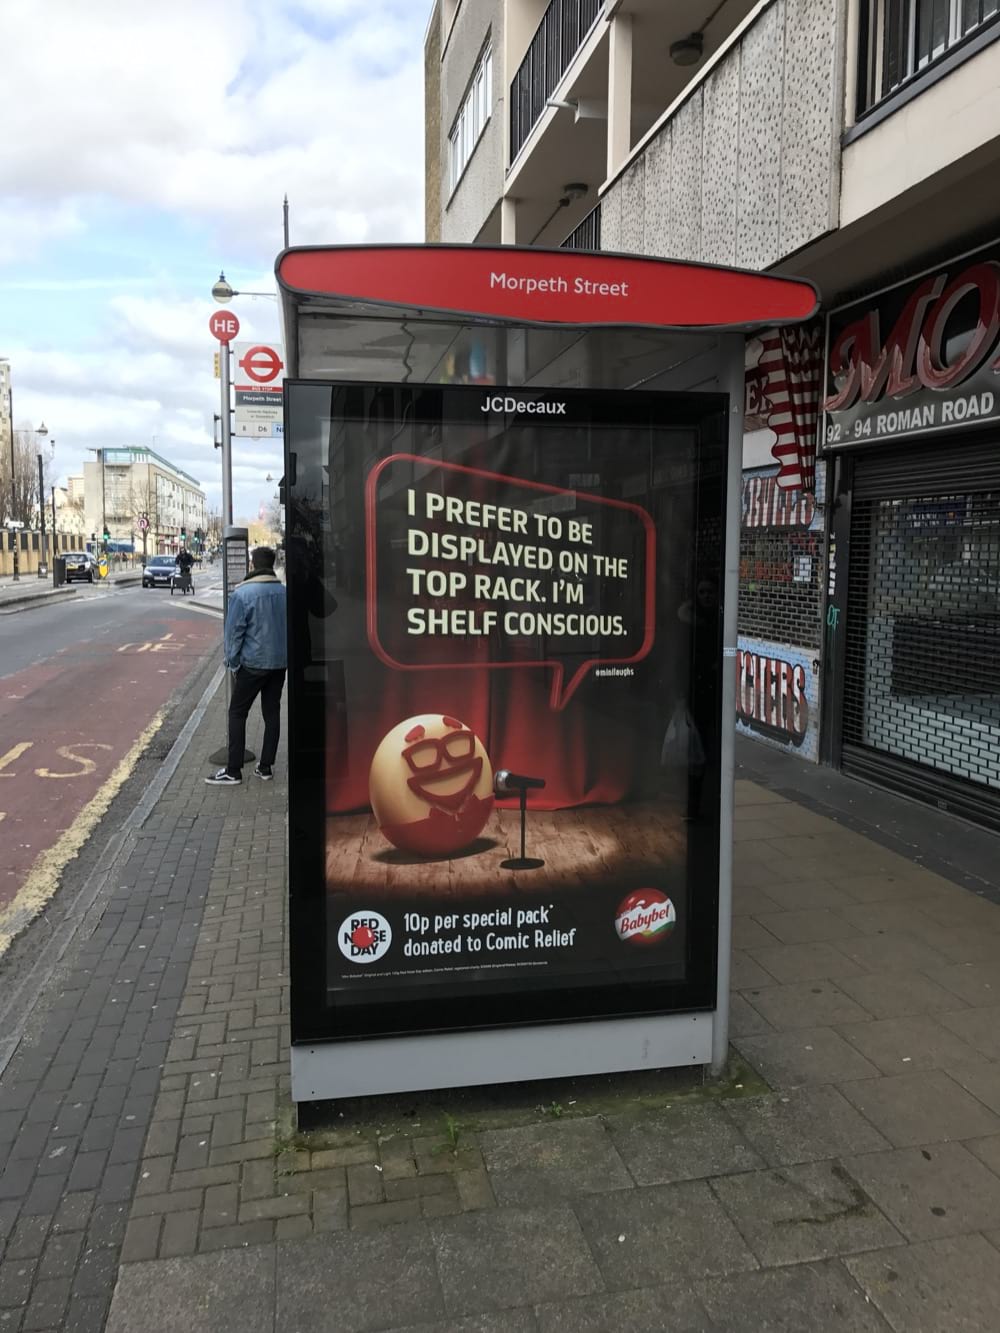 I prefer to be displayed don the top rack. I'm shelf conscious - Mini BabyBel Comic Relief Bus Stop